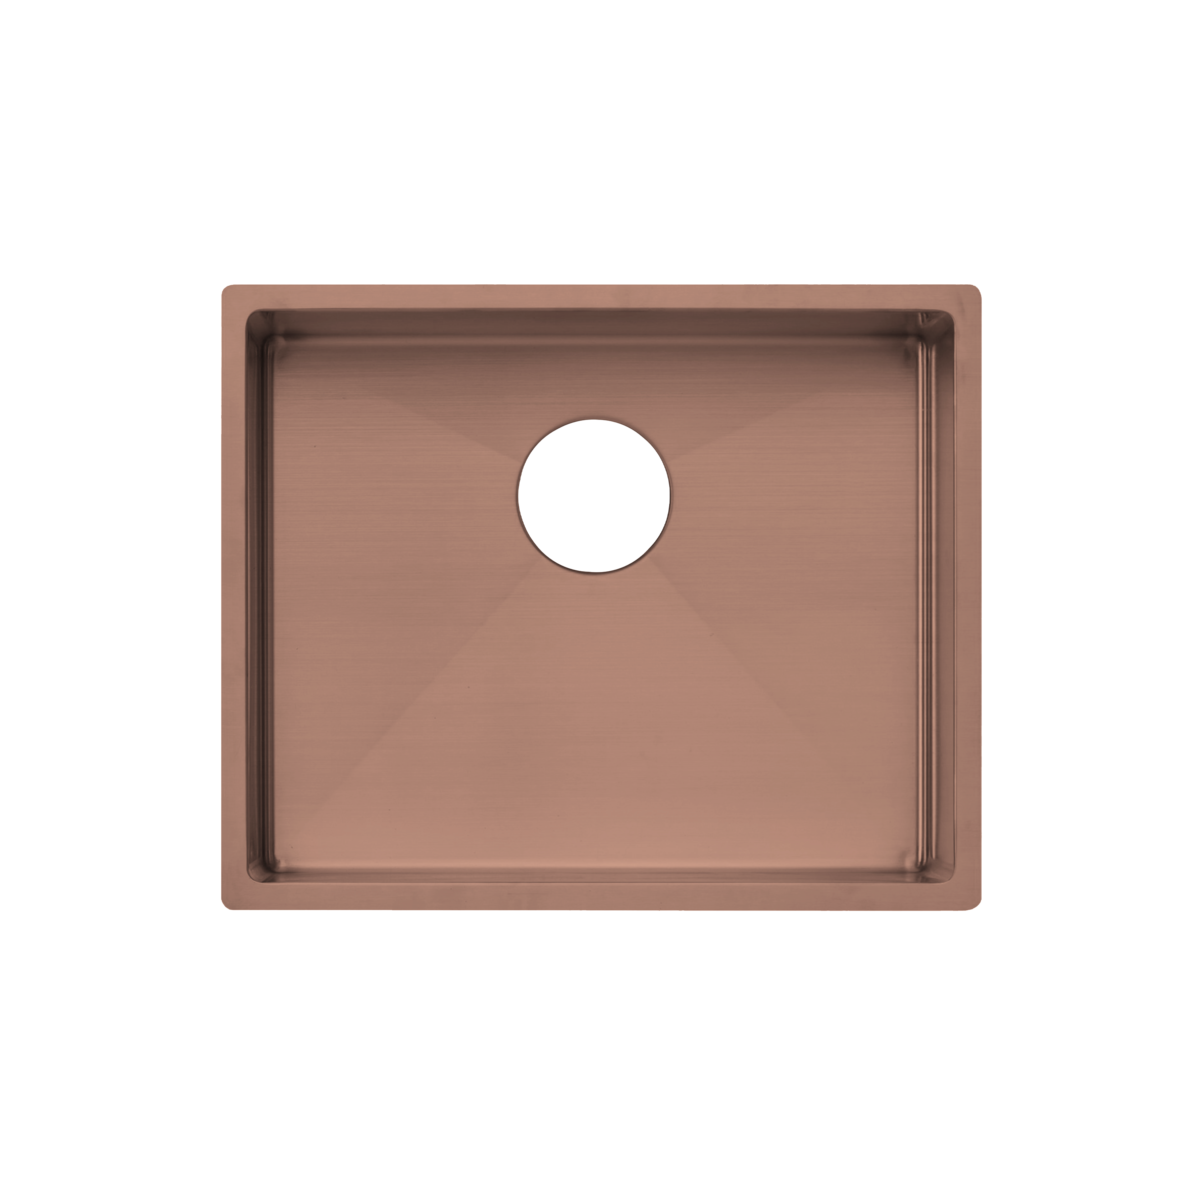 Seba Kitchen Sink 550mm with Overflow and Rack – Brushed Copper